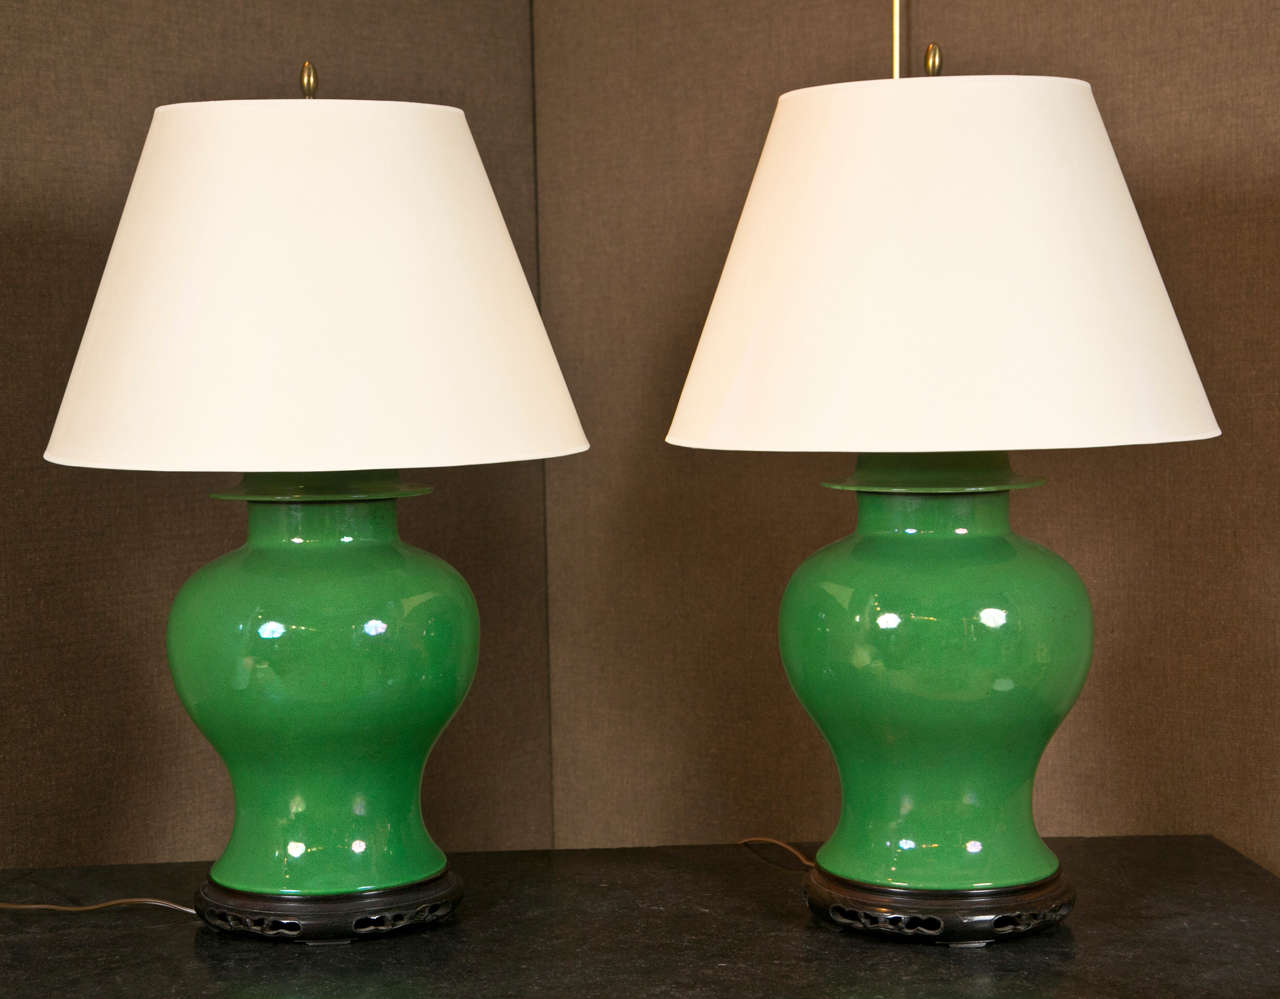 A pair of green-glazed Chinese porcelain ginger jars mounted as table lamps on carved wooden stands.